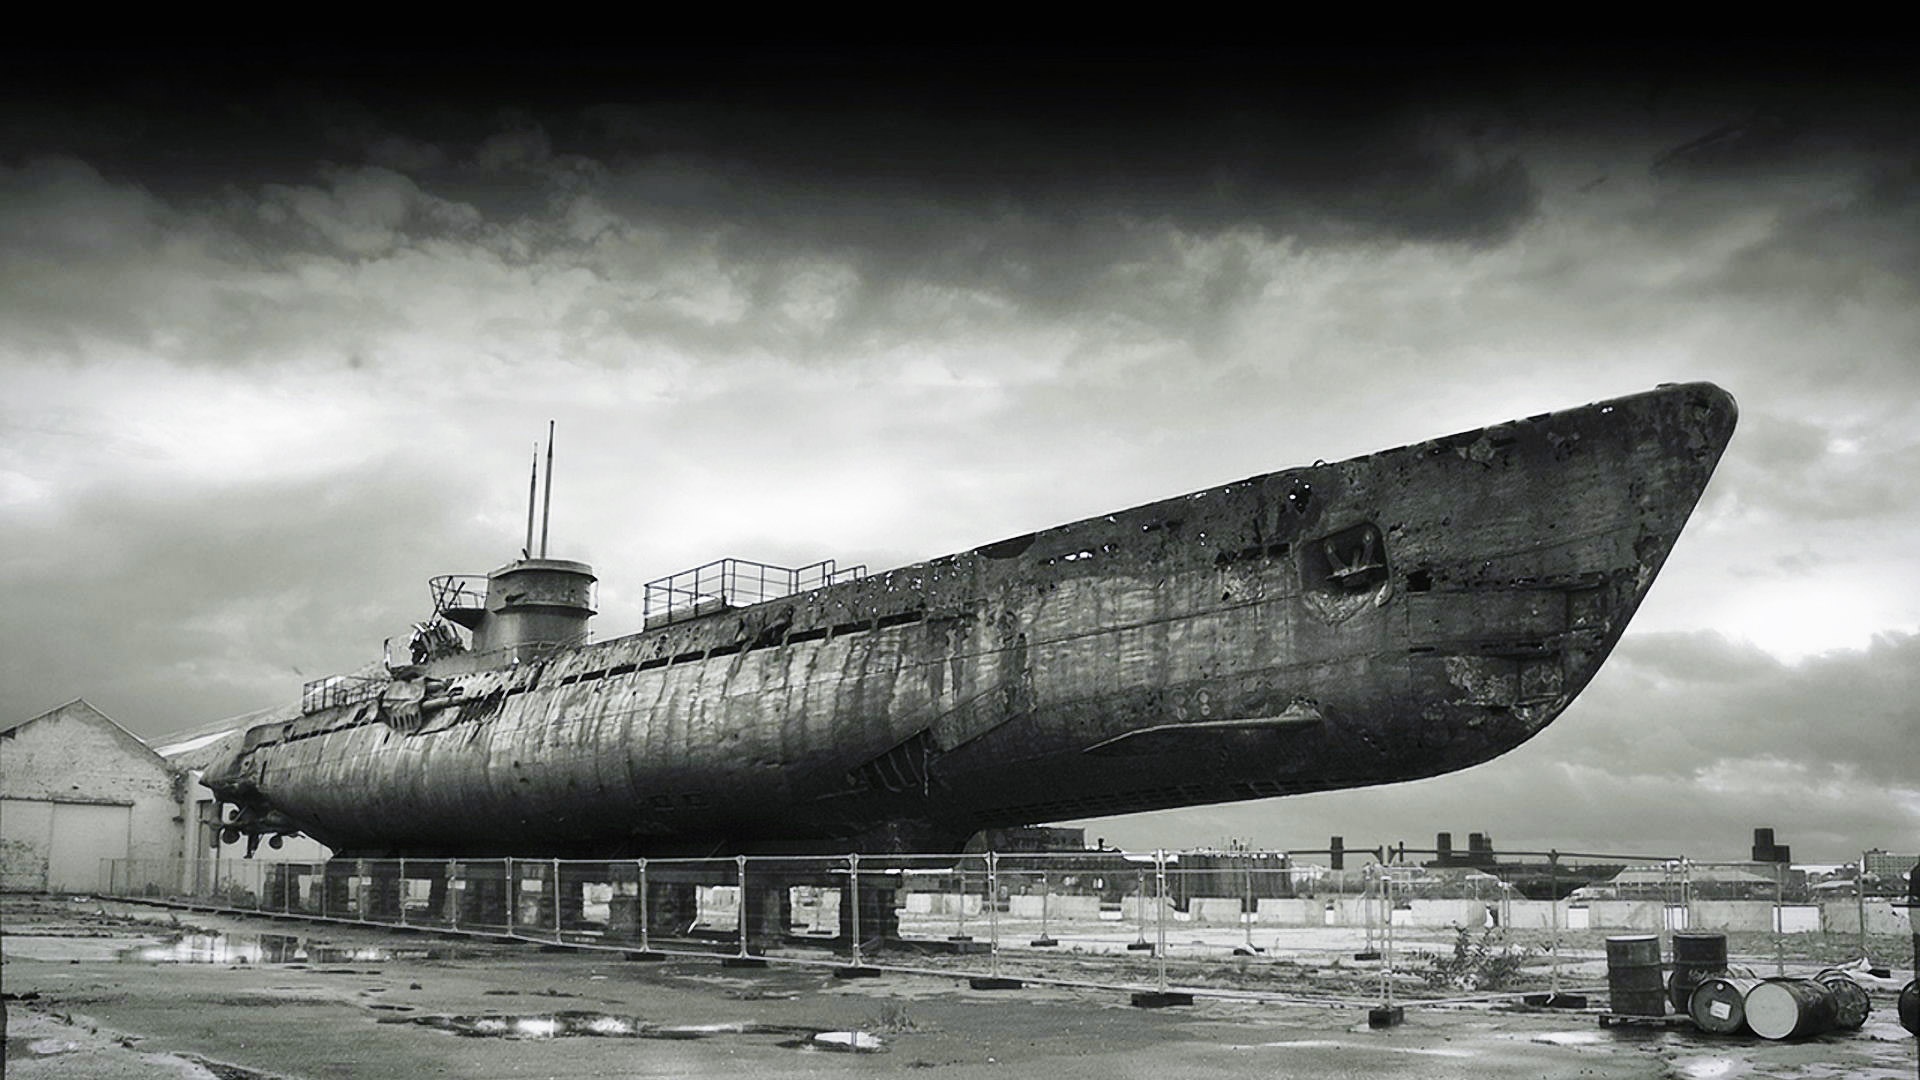 Abandoned Submarines   HD Wallpapers Widescreen   1920x1080